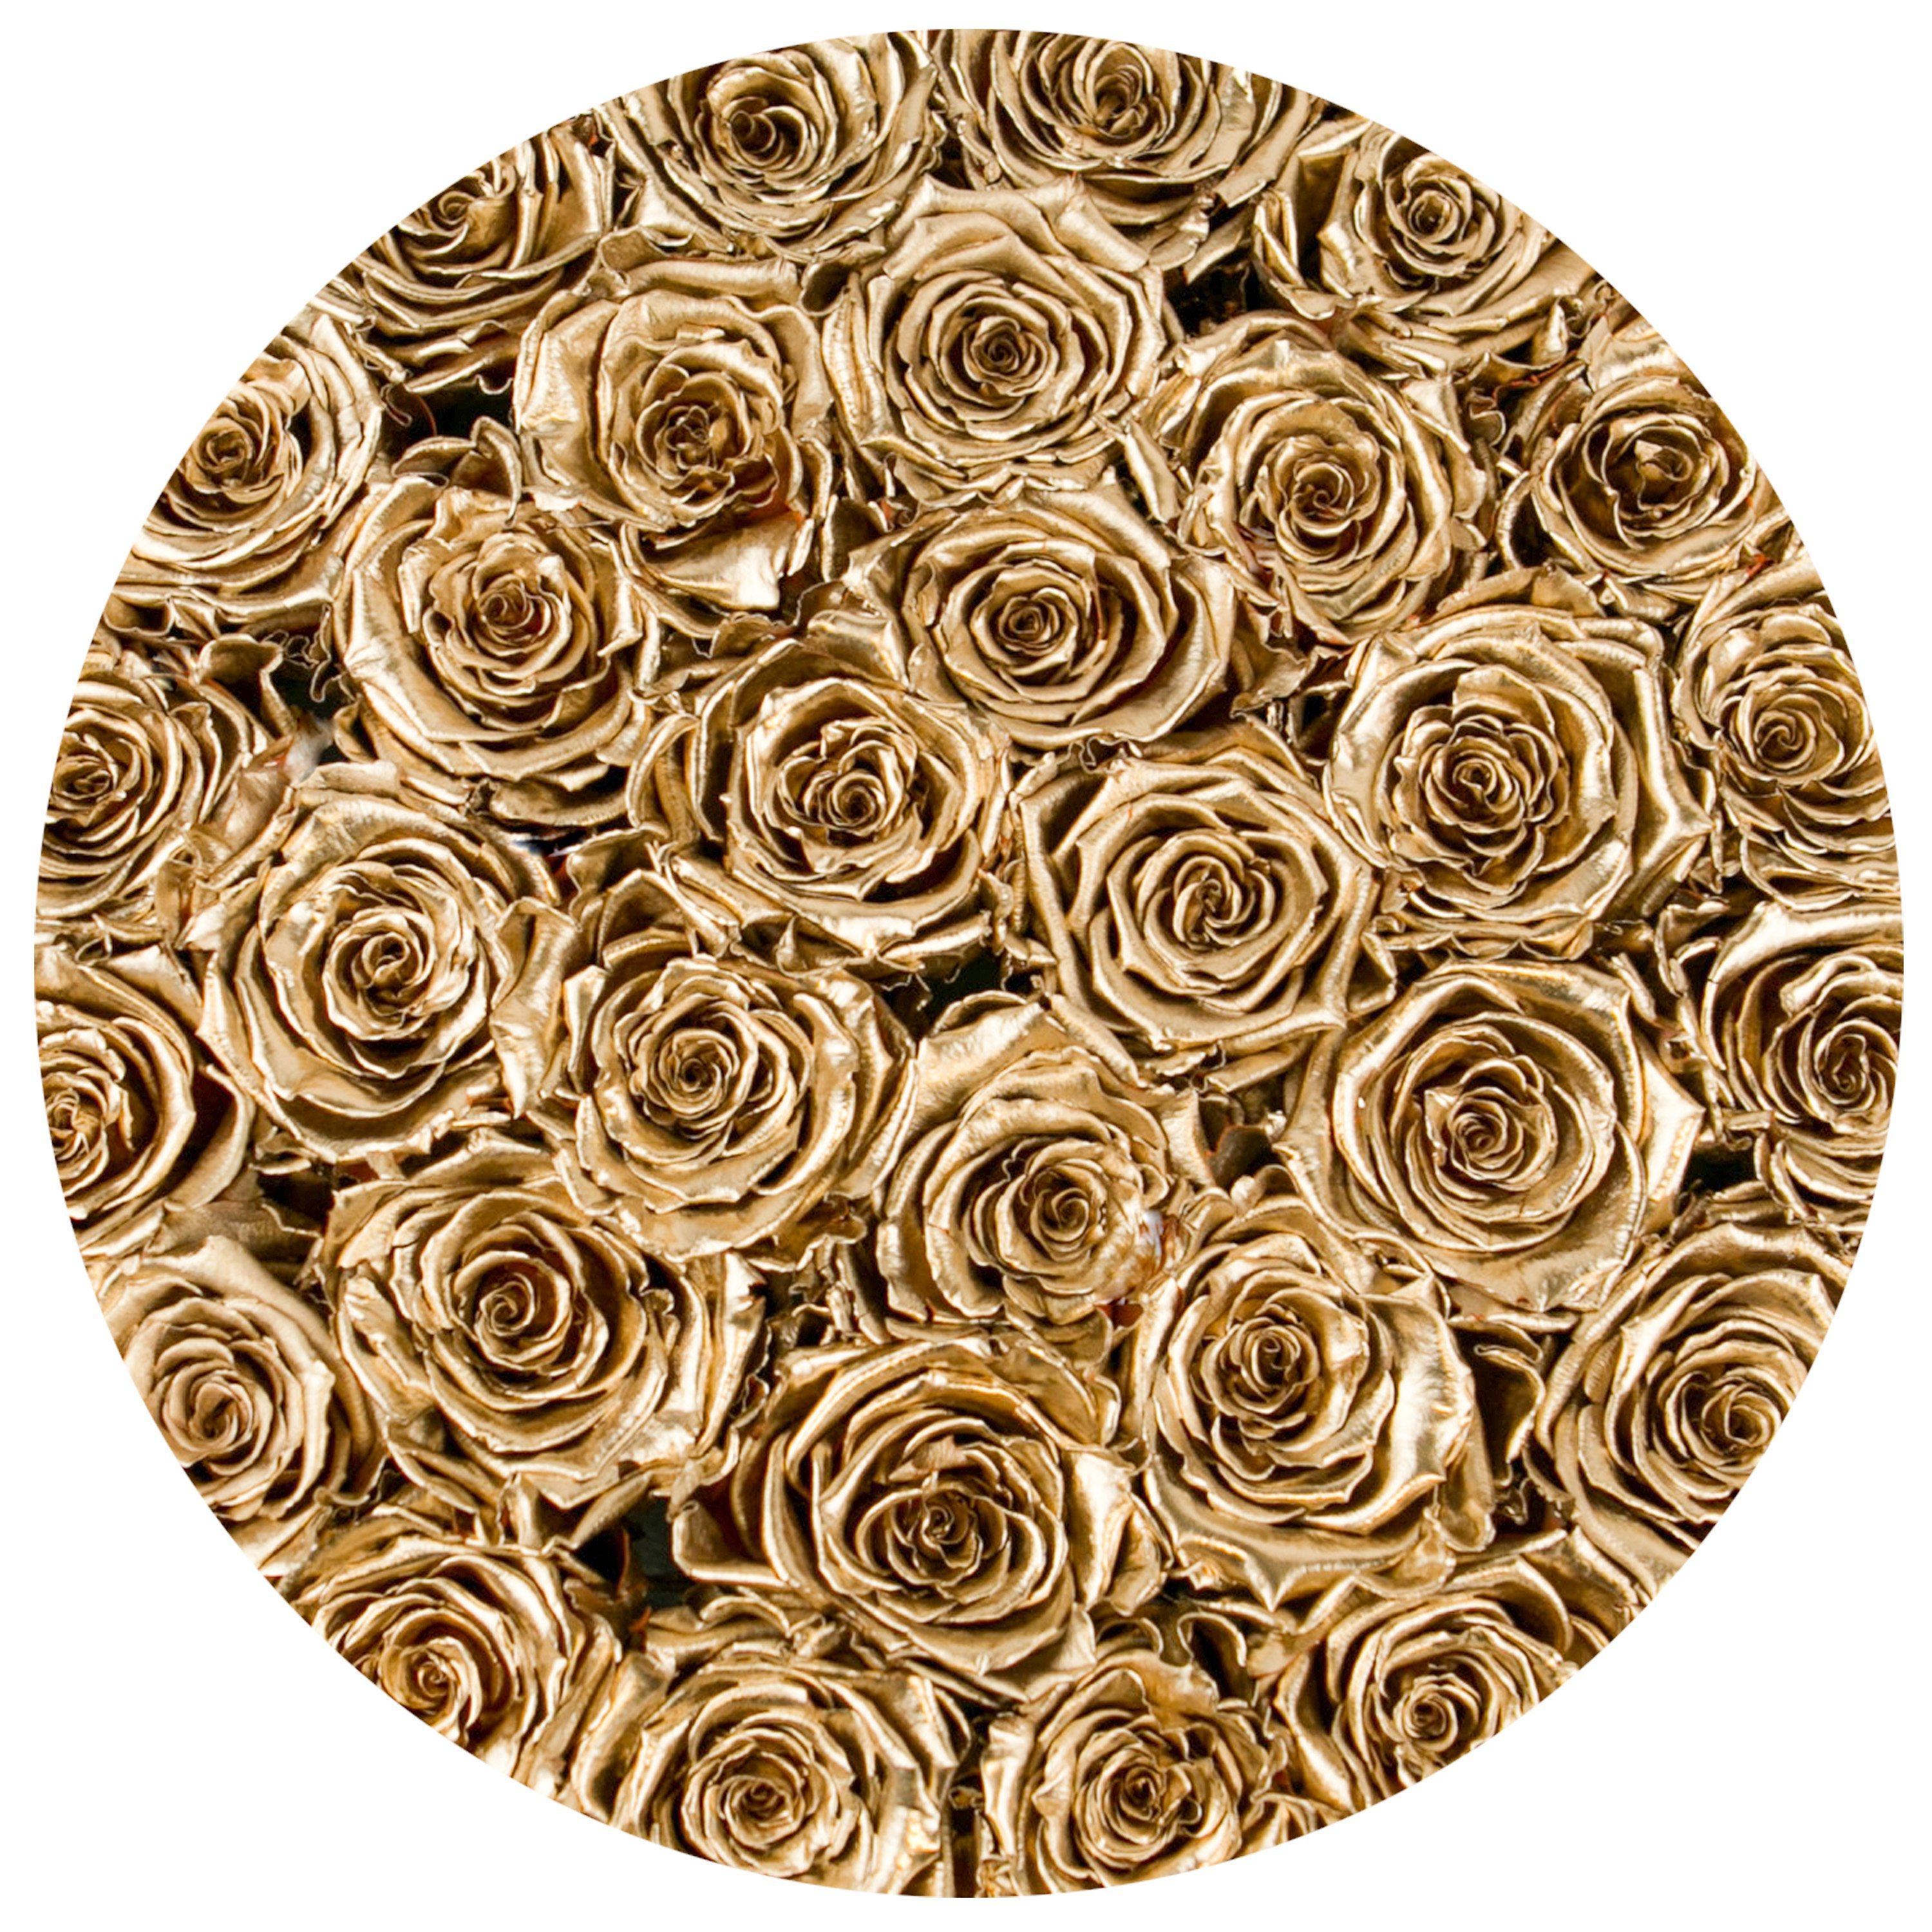 the million roses medium round box - "Love Collection" limited edition "LOVE" - GOLD ROSES gold eternity roses - the million roses